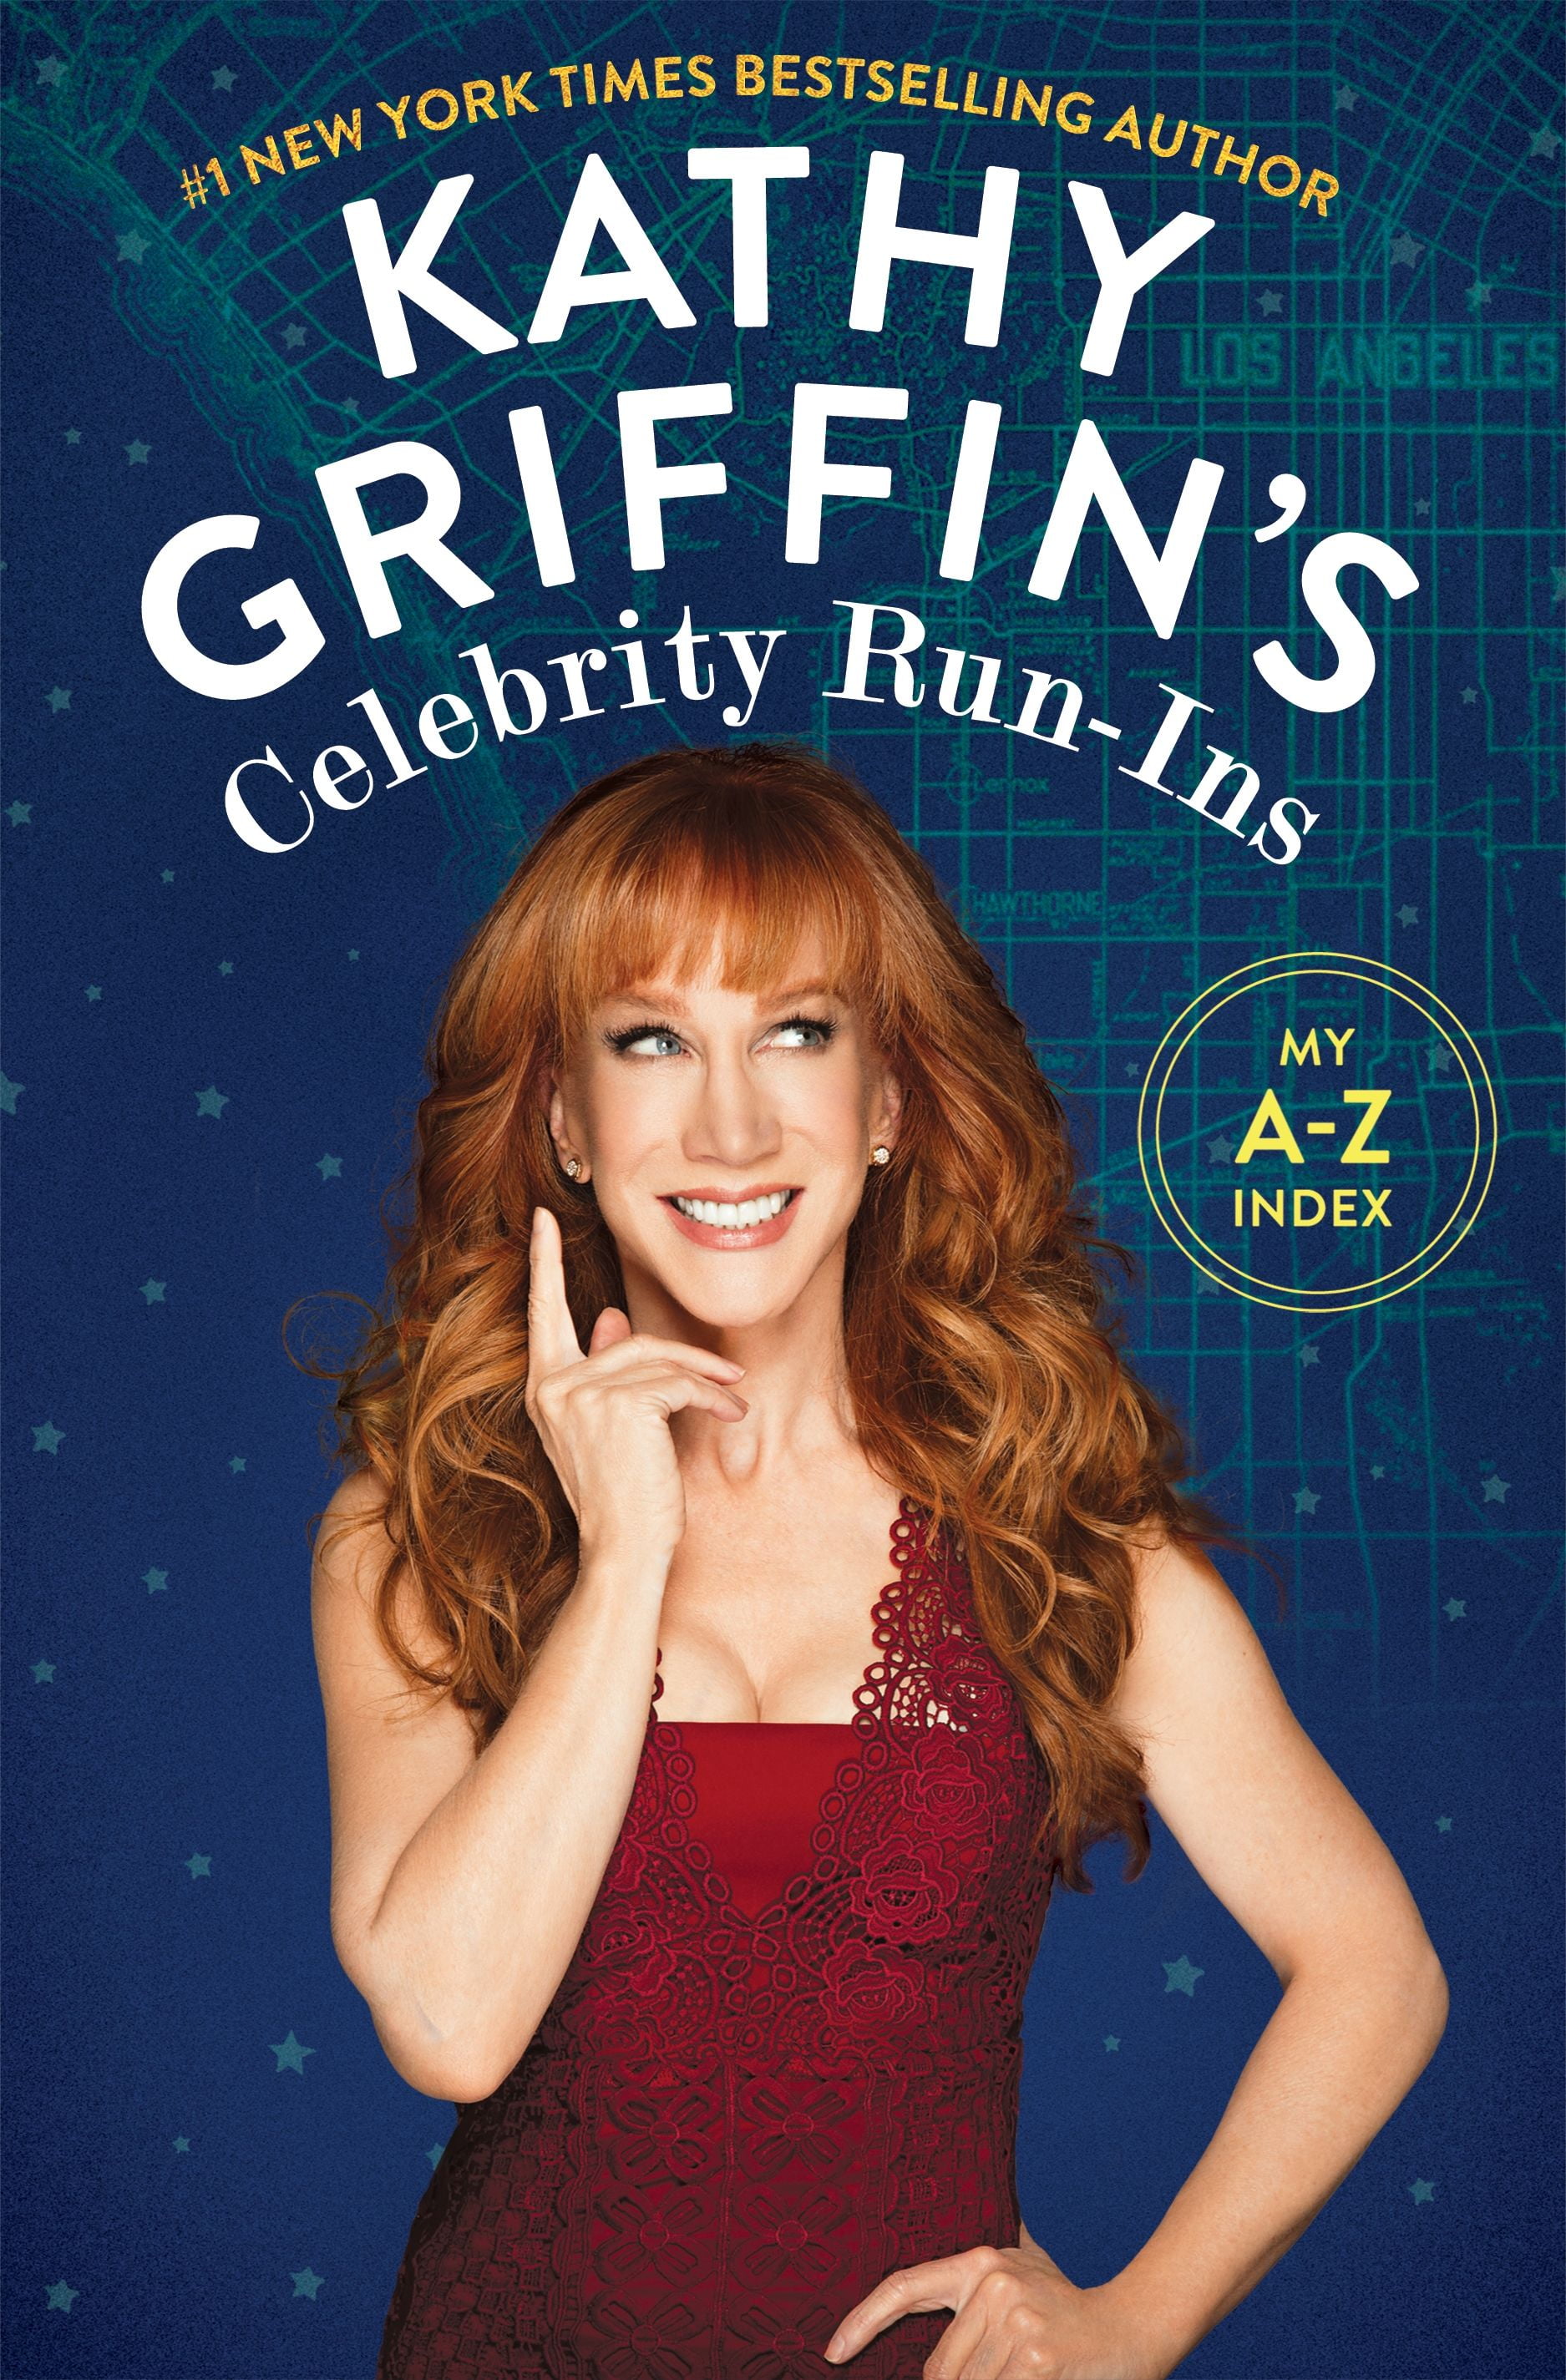 Kathy griffin panty